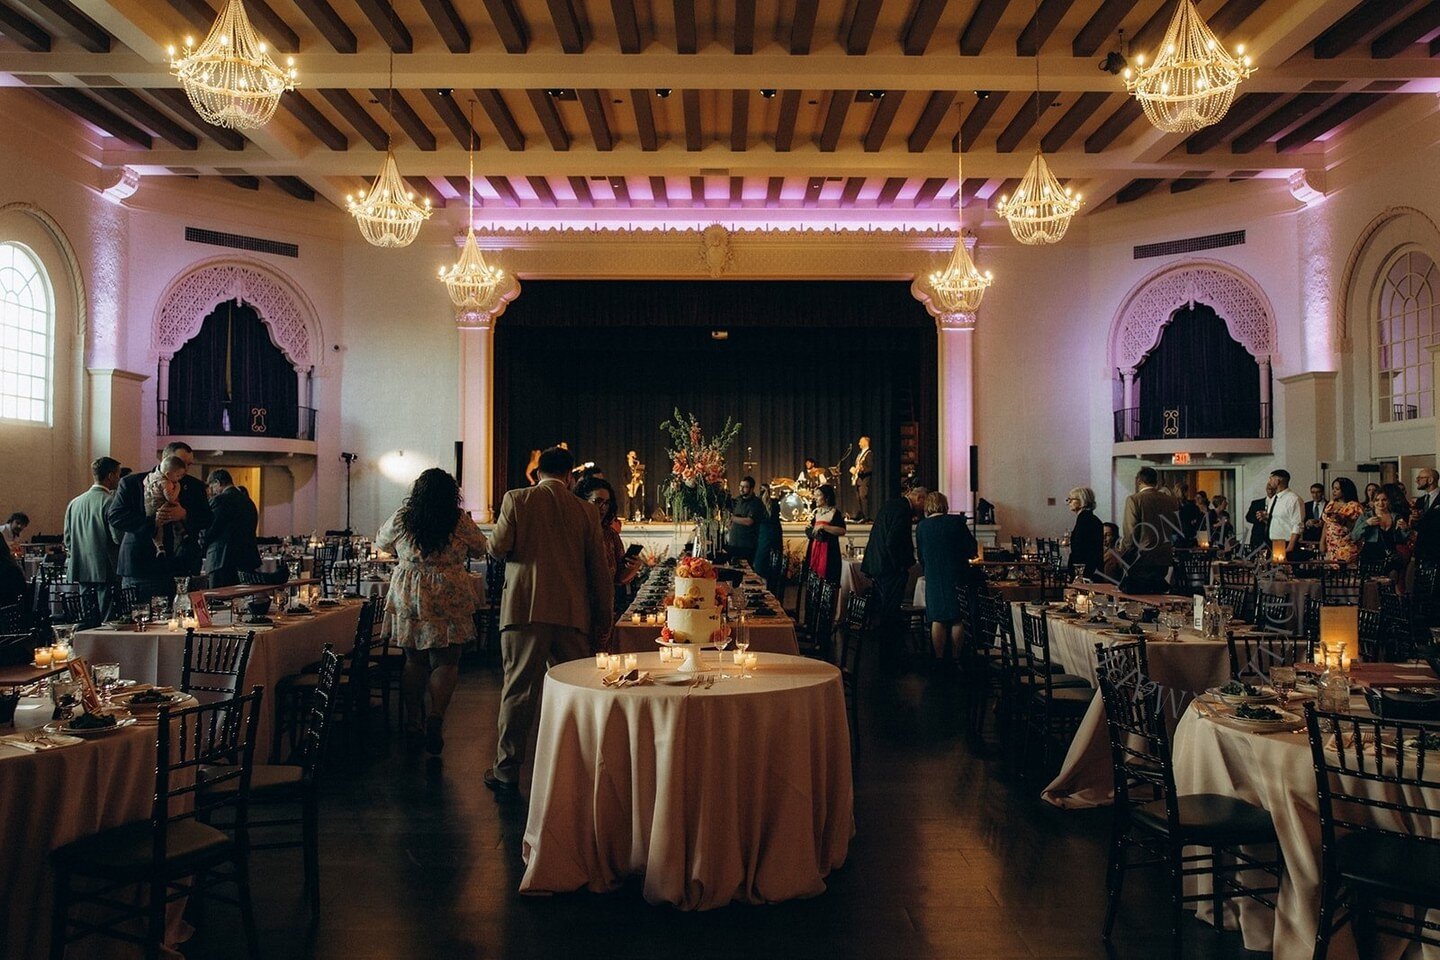 ✨Fully operational stage, opulent chandeliers, natural light illuminating 12,000 sq. feet, what more could you ask for on your special day? ✨⁠
⁠
Discover the possibilities of your event at our venue when you schedule a tour with one of our Expert Eve